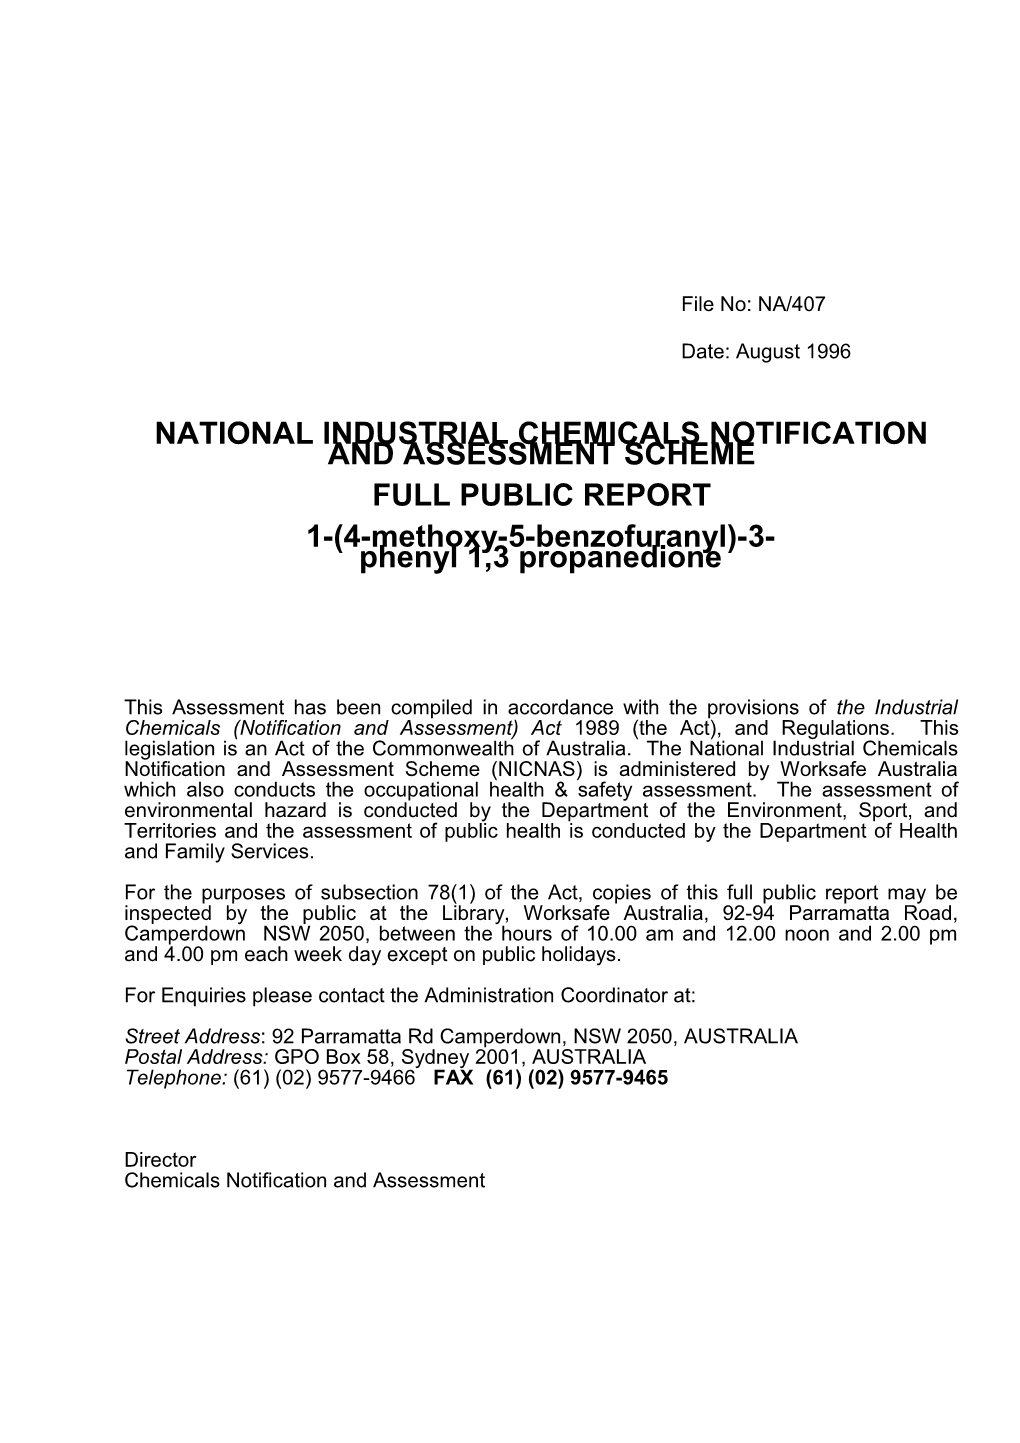 National Industrial Chemicals Notification s5